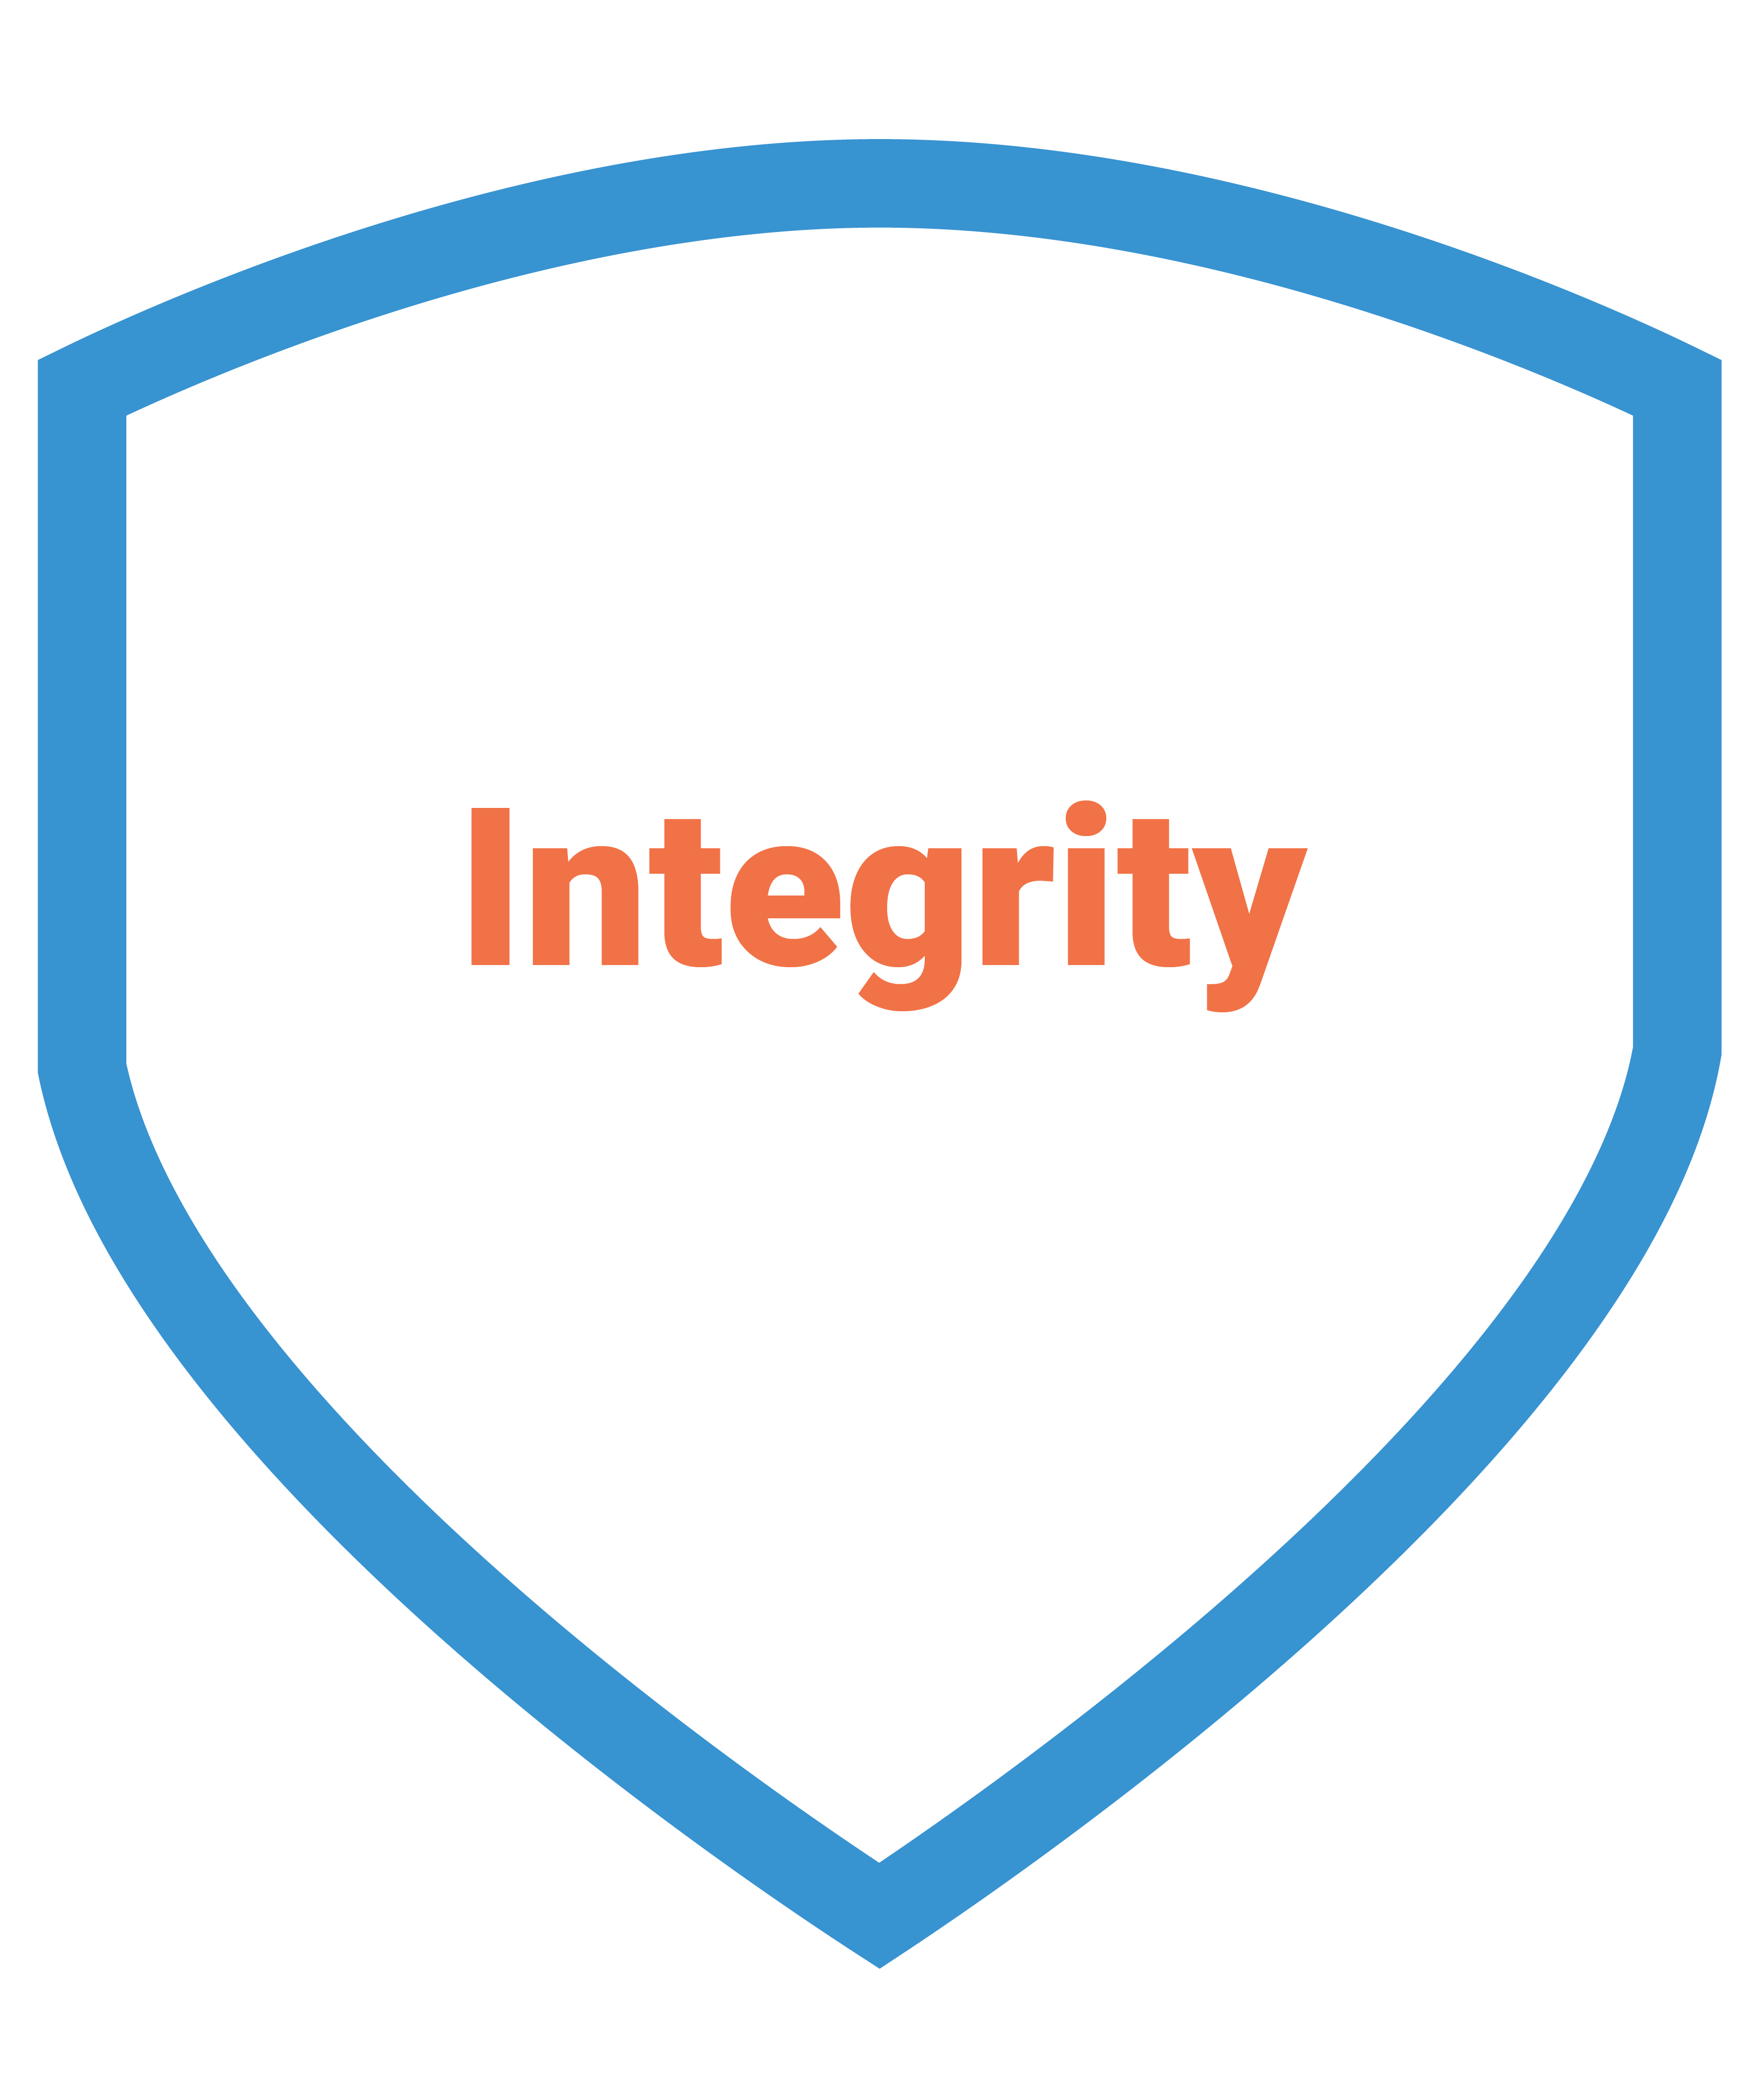 About the company - Our values - The word "Integrity" in orange text surrounded by a blue shield outline.